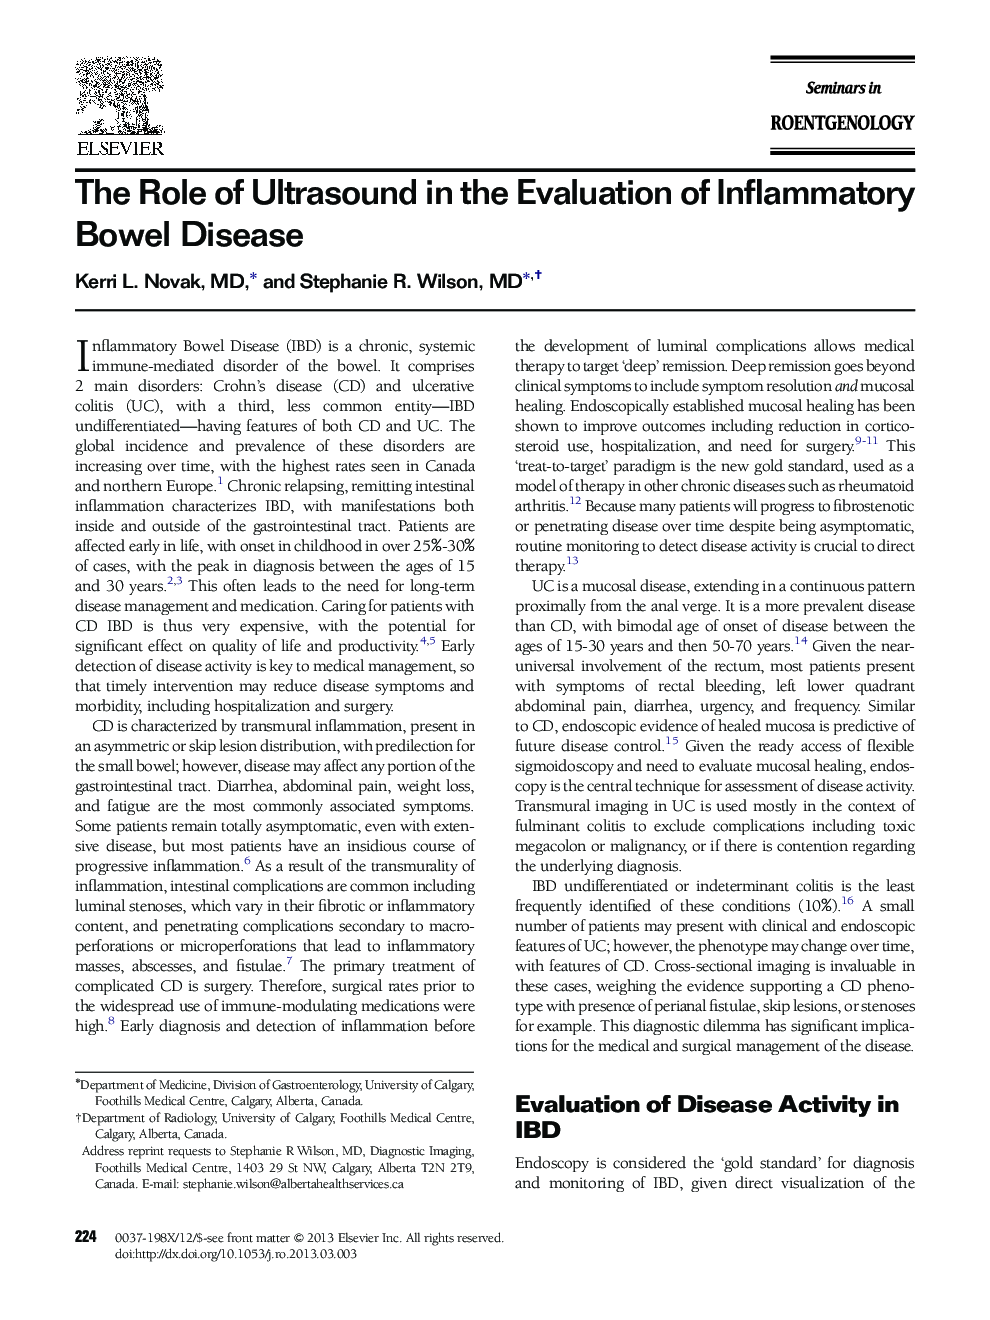 The Role of Ultrasound in the Evaluation of Inflammatory Bowel Disease